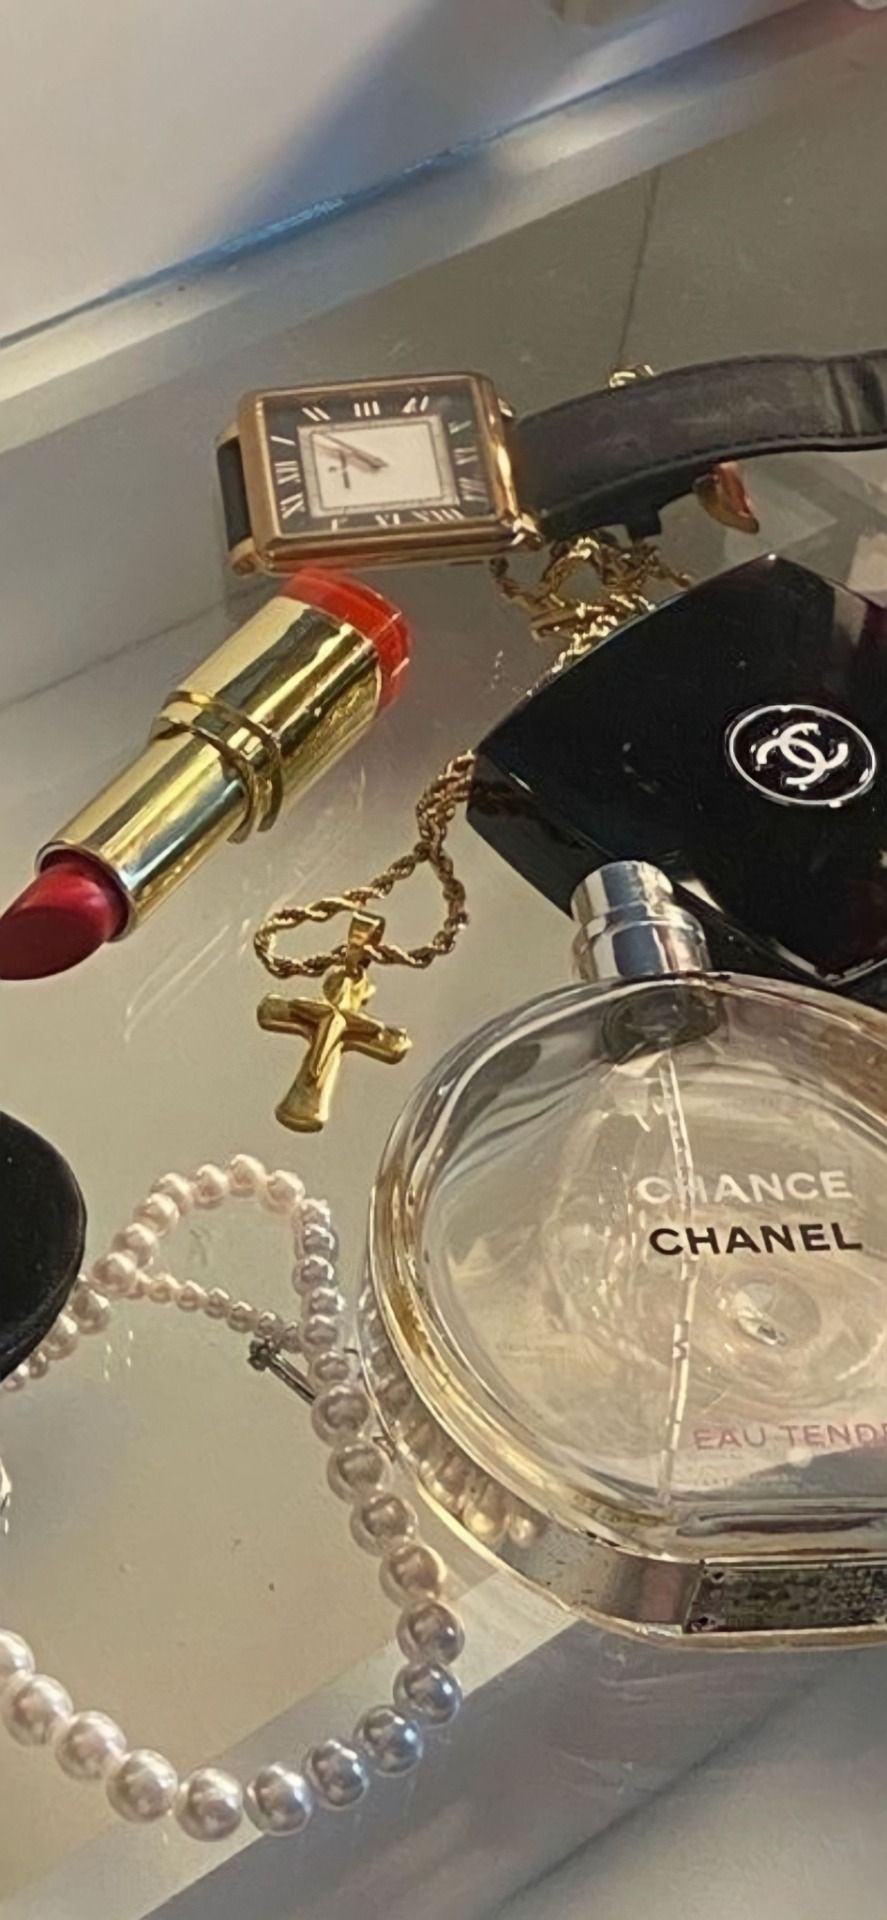 A tray with a watch, lipstick, pearls, and a bottle of Chanel perfume. - Money